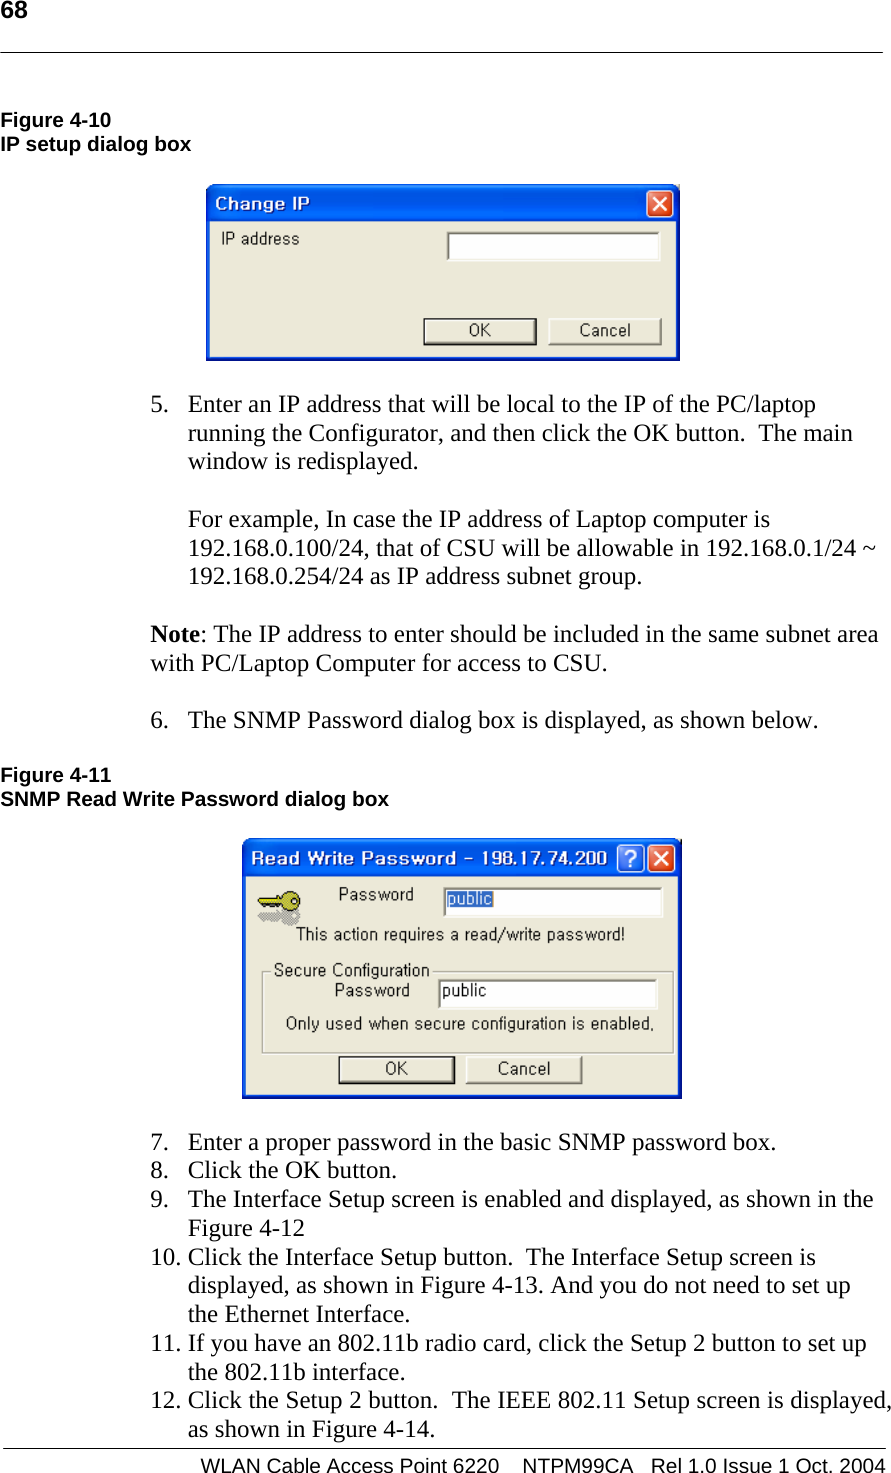   68   Figure 4-10 IP setup dialog box    5. Enter an IP address that will be local to the IP of the PC/laptop running the Configurator, and then click the OK button.  The main window is redisplayed.  For example, In case the IP address of Laptop computer is 192.168.0.100/24, that of CSU will be allowable in 192.168.0.1/24 ~ 192.168.0.254/24 as IP address subnet group.  Note: The IP address to enter should be included in the same subnet area with PC/Laptop Computer for access to CSU.   6. The SNMP Password dialog box is displayed, as shown below.   Figure 4-11 SNMP Read Write Password dialog box    7. Enter a proper password in the basic SNMP password box. 8. Click the OK button. 9. The Interface Setup screen is enabled and displayed, as shown in the Figure 4-12 10. Click the Interface Setup button.  The Interface Setup screen is displayed, as shown in Figure 4-13. And you do not need to set up the Ethernet Interface.  11. If you have an 802.11b radio card, click the Setup 2 button to set up the 802.11b interface. 12. Click the Setup 2 button.  The IEEE 802.11 Setup screen is displayed, as shown in Figure 4-14. WLAN Cable Access Point 6220    NTPM99CA   Rel 1.0 Issue 1 Oct. 2004